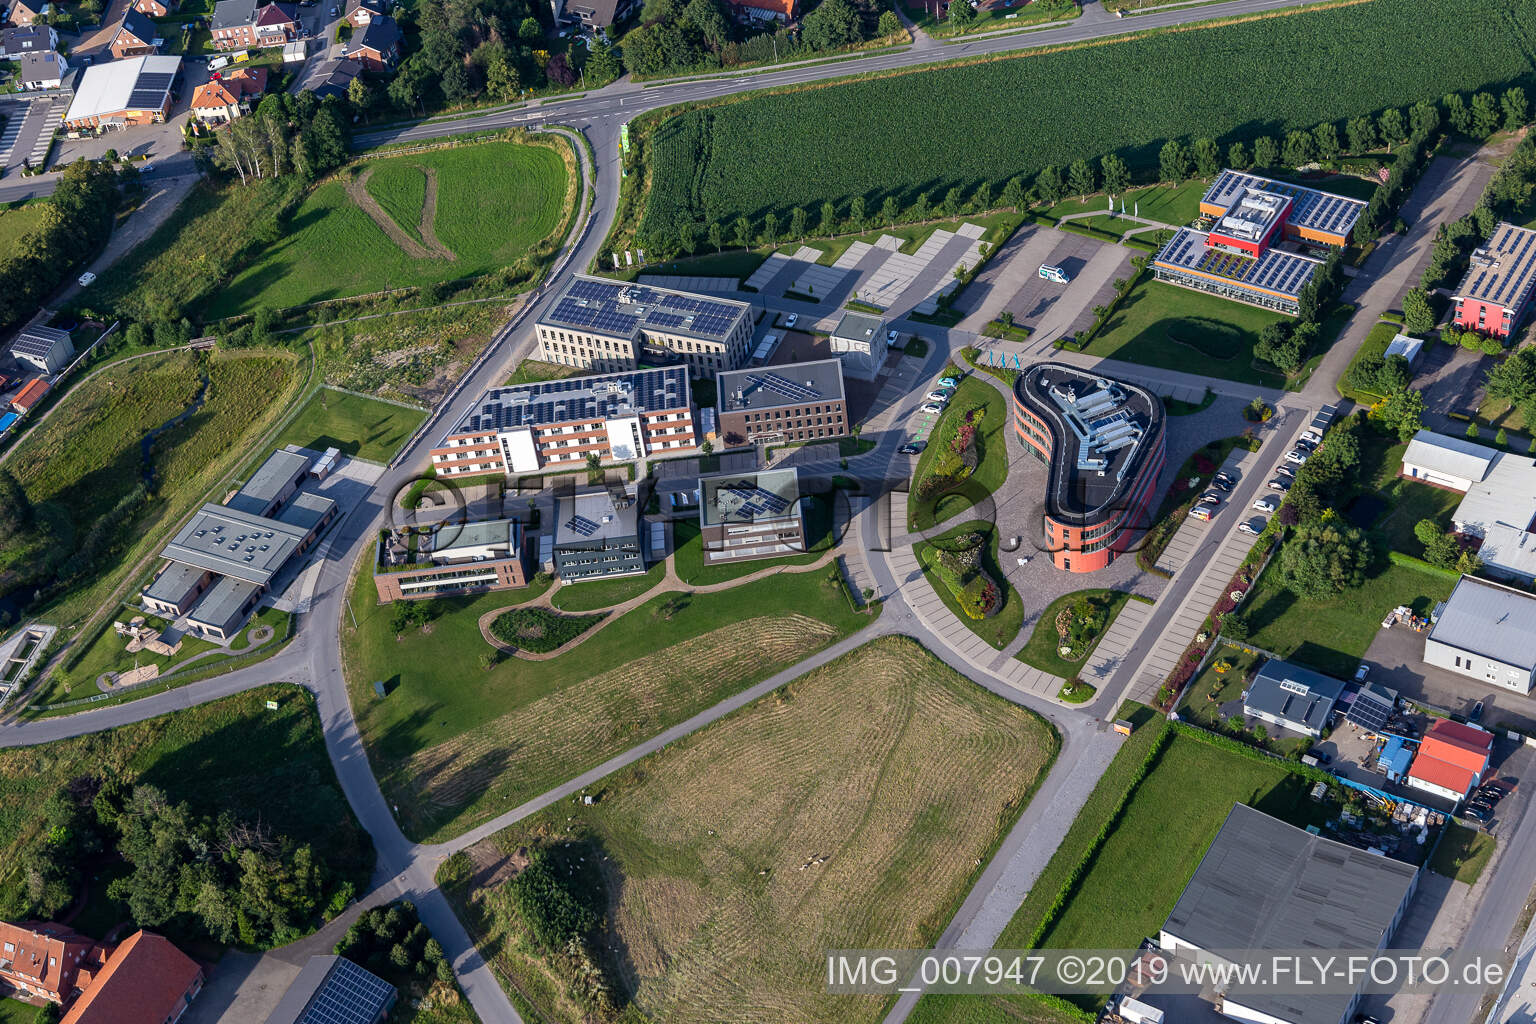 Aerial view of D.velop Lifer Sciences campus in Gescher in the state North Rhine-Westphalia, Germany